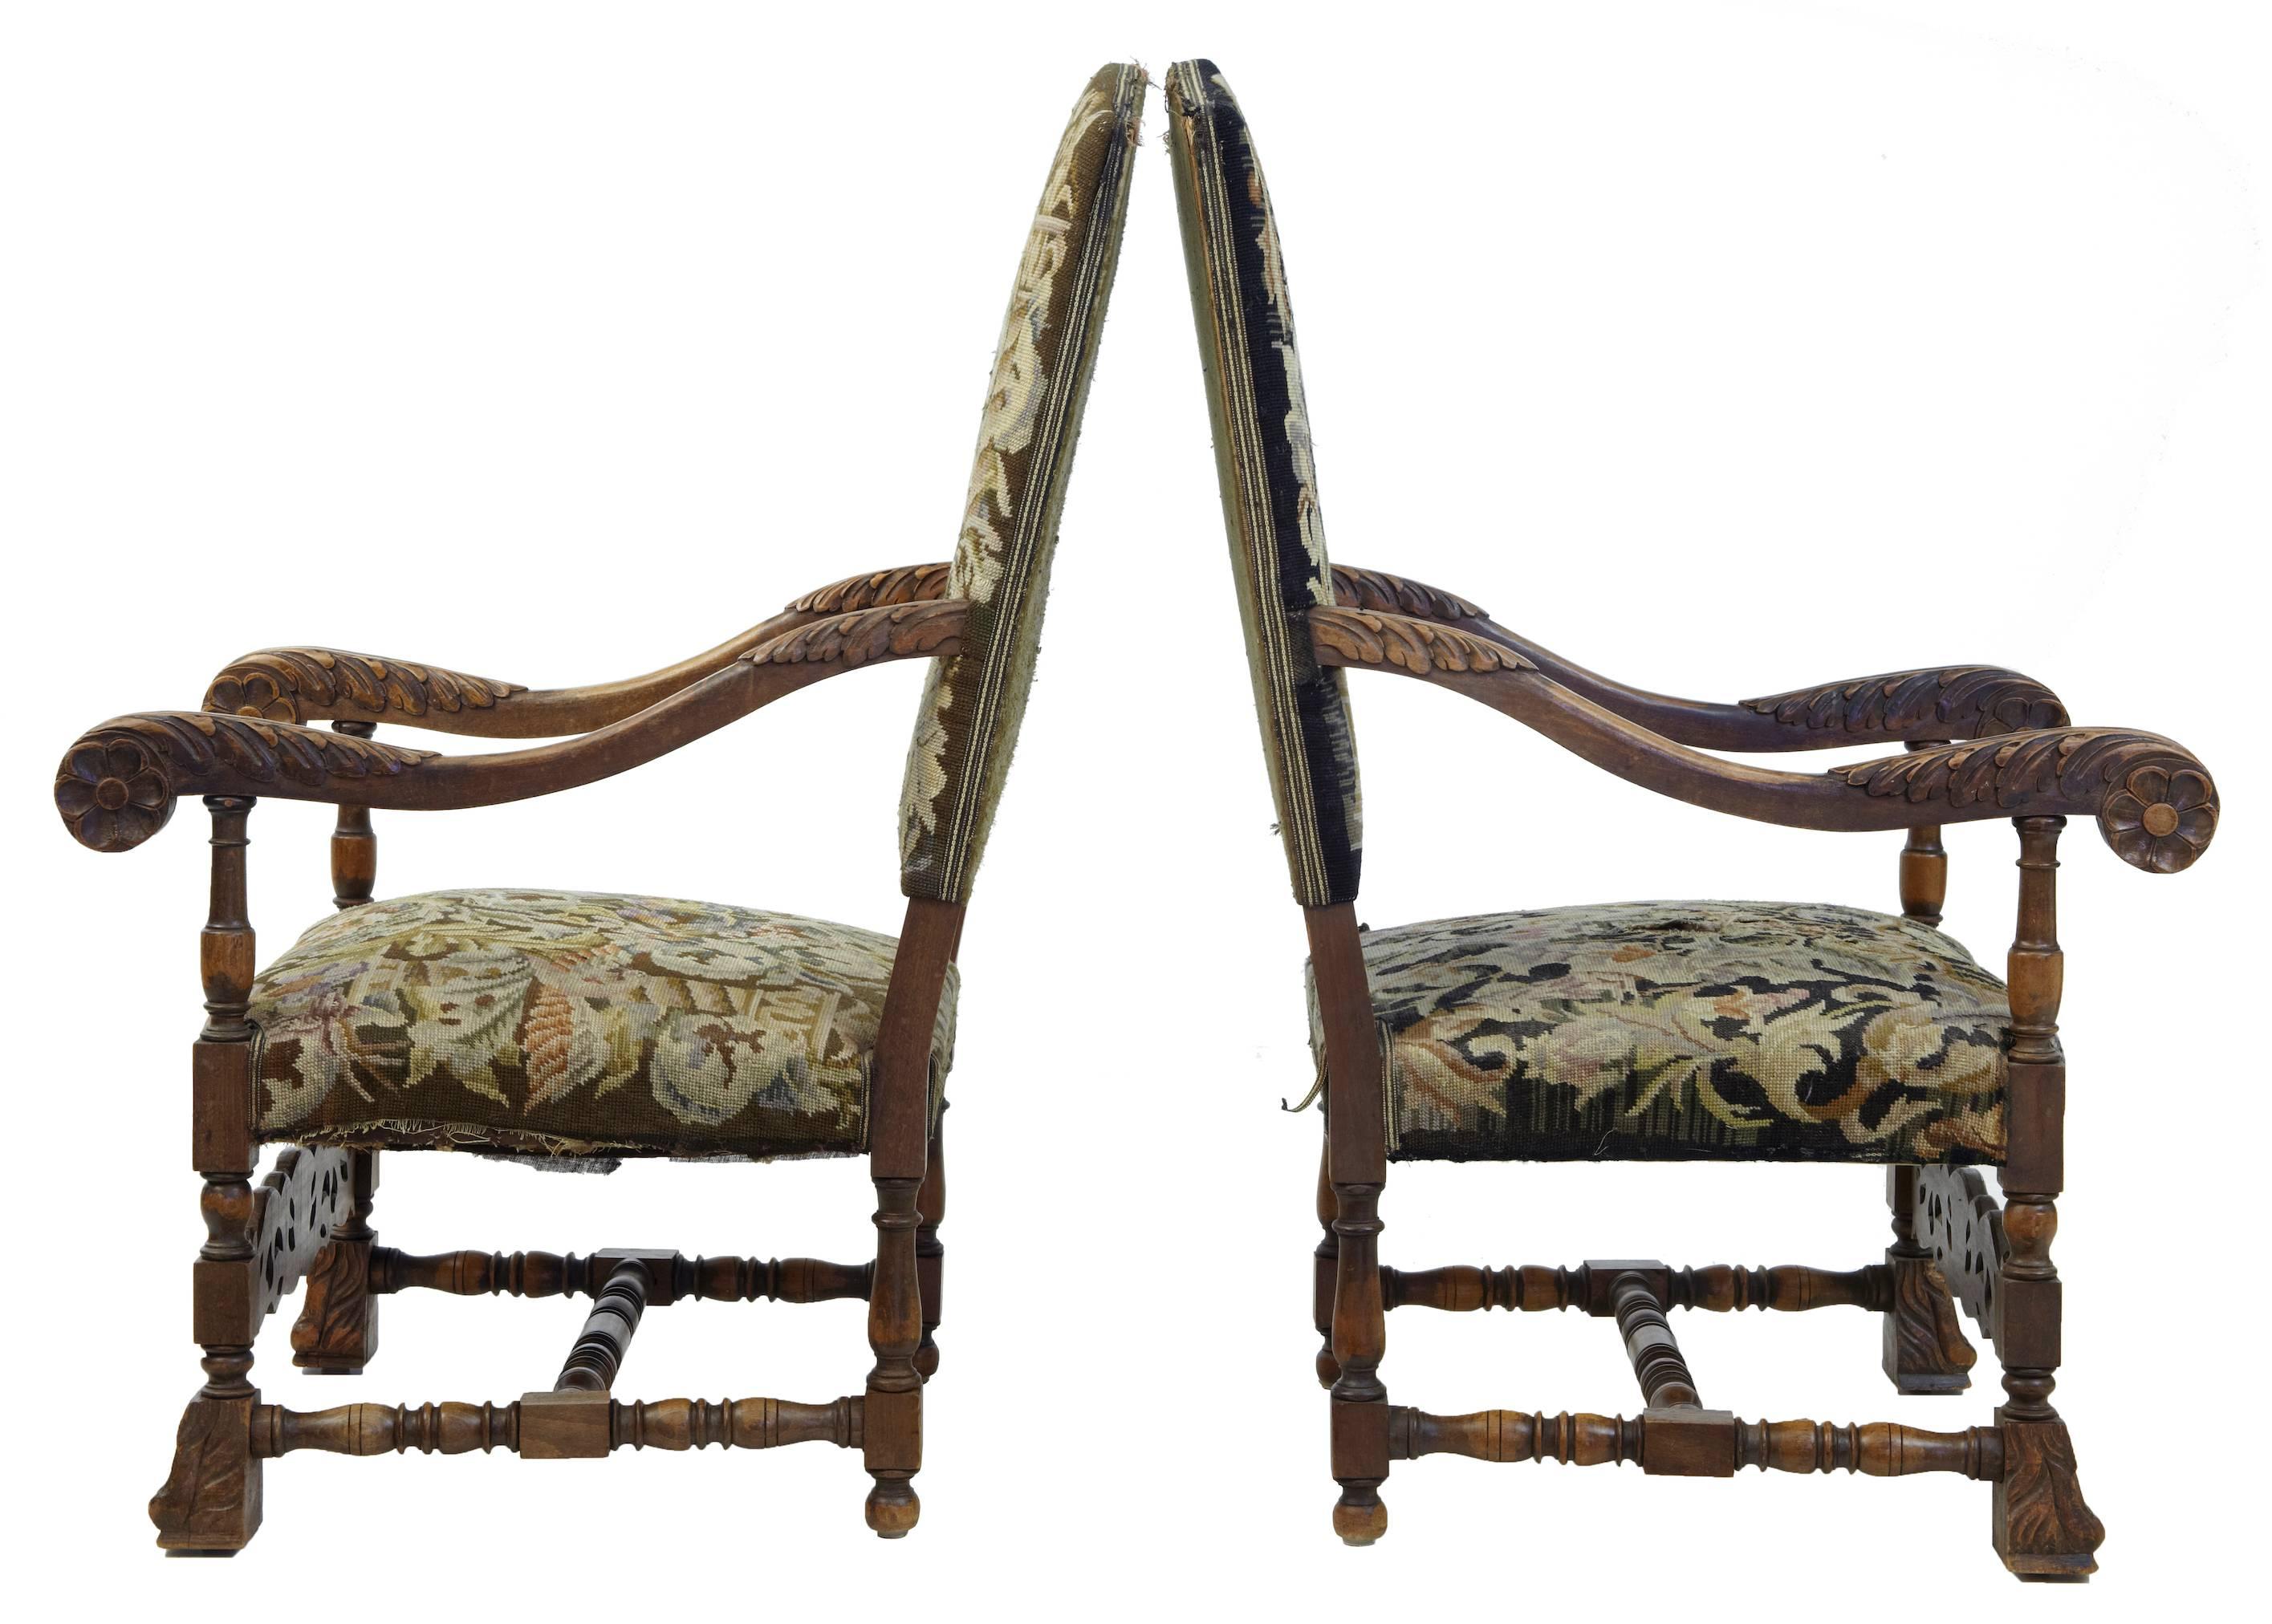 Pair of carved oak armchairs with original upholstery circa 1880.
Scrolling arms with carved acanthus leaves.
Block paw feet, united by h frame stretcher.
Contrasting fabrics on each chair, some wear and holes to covering.  (see